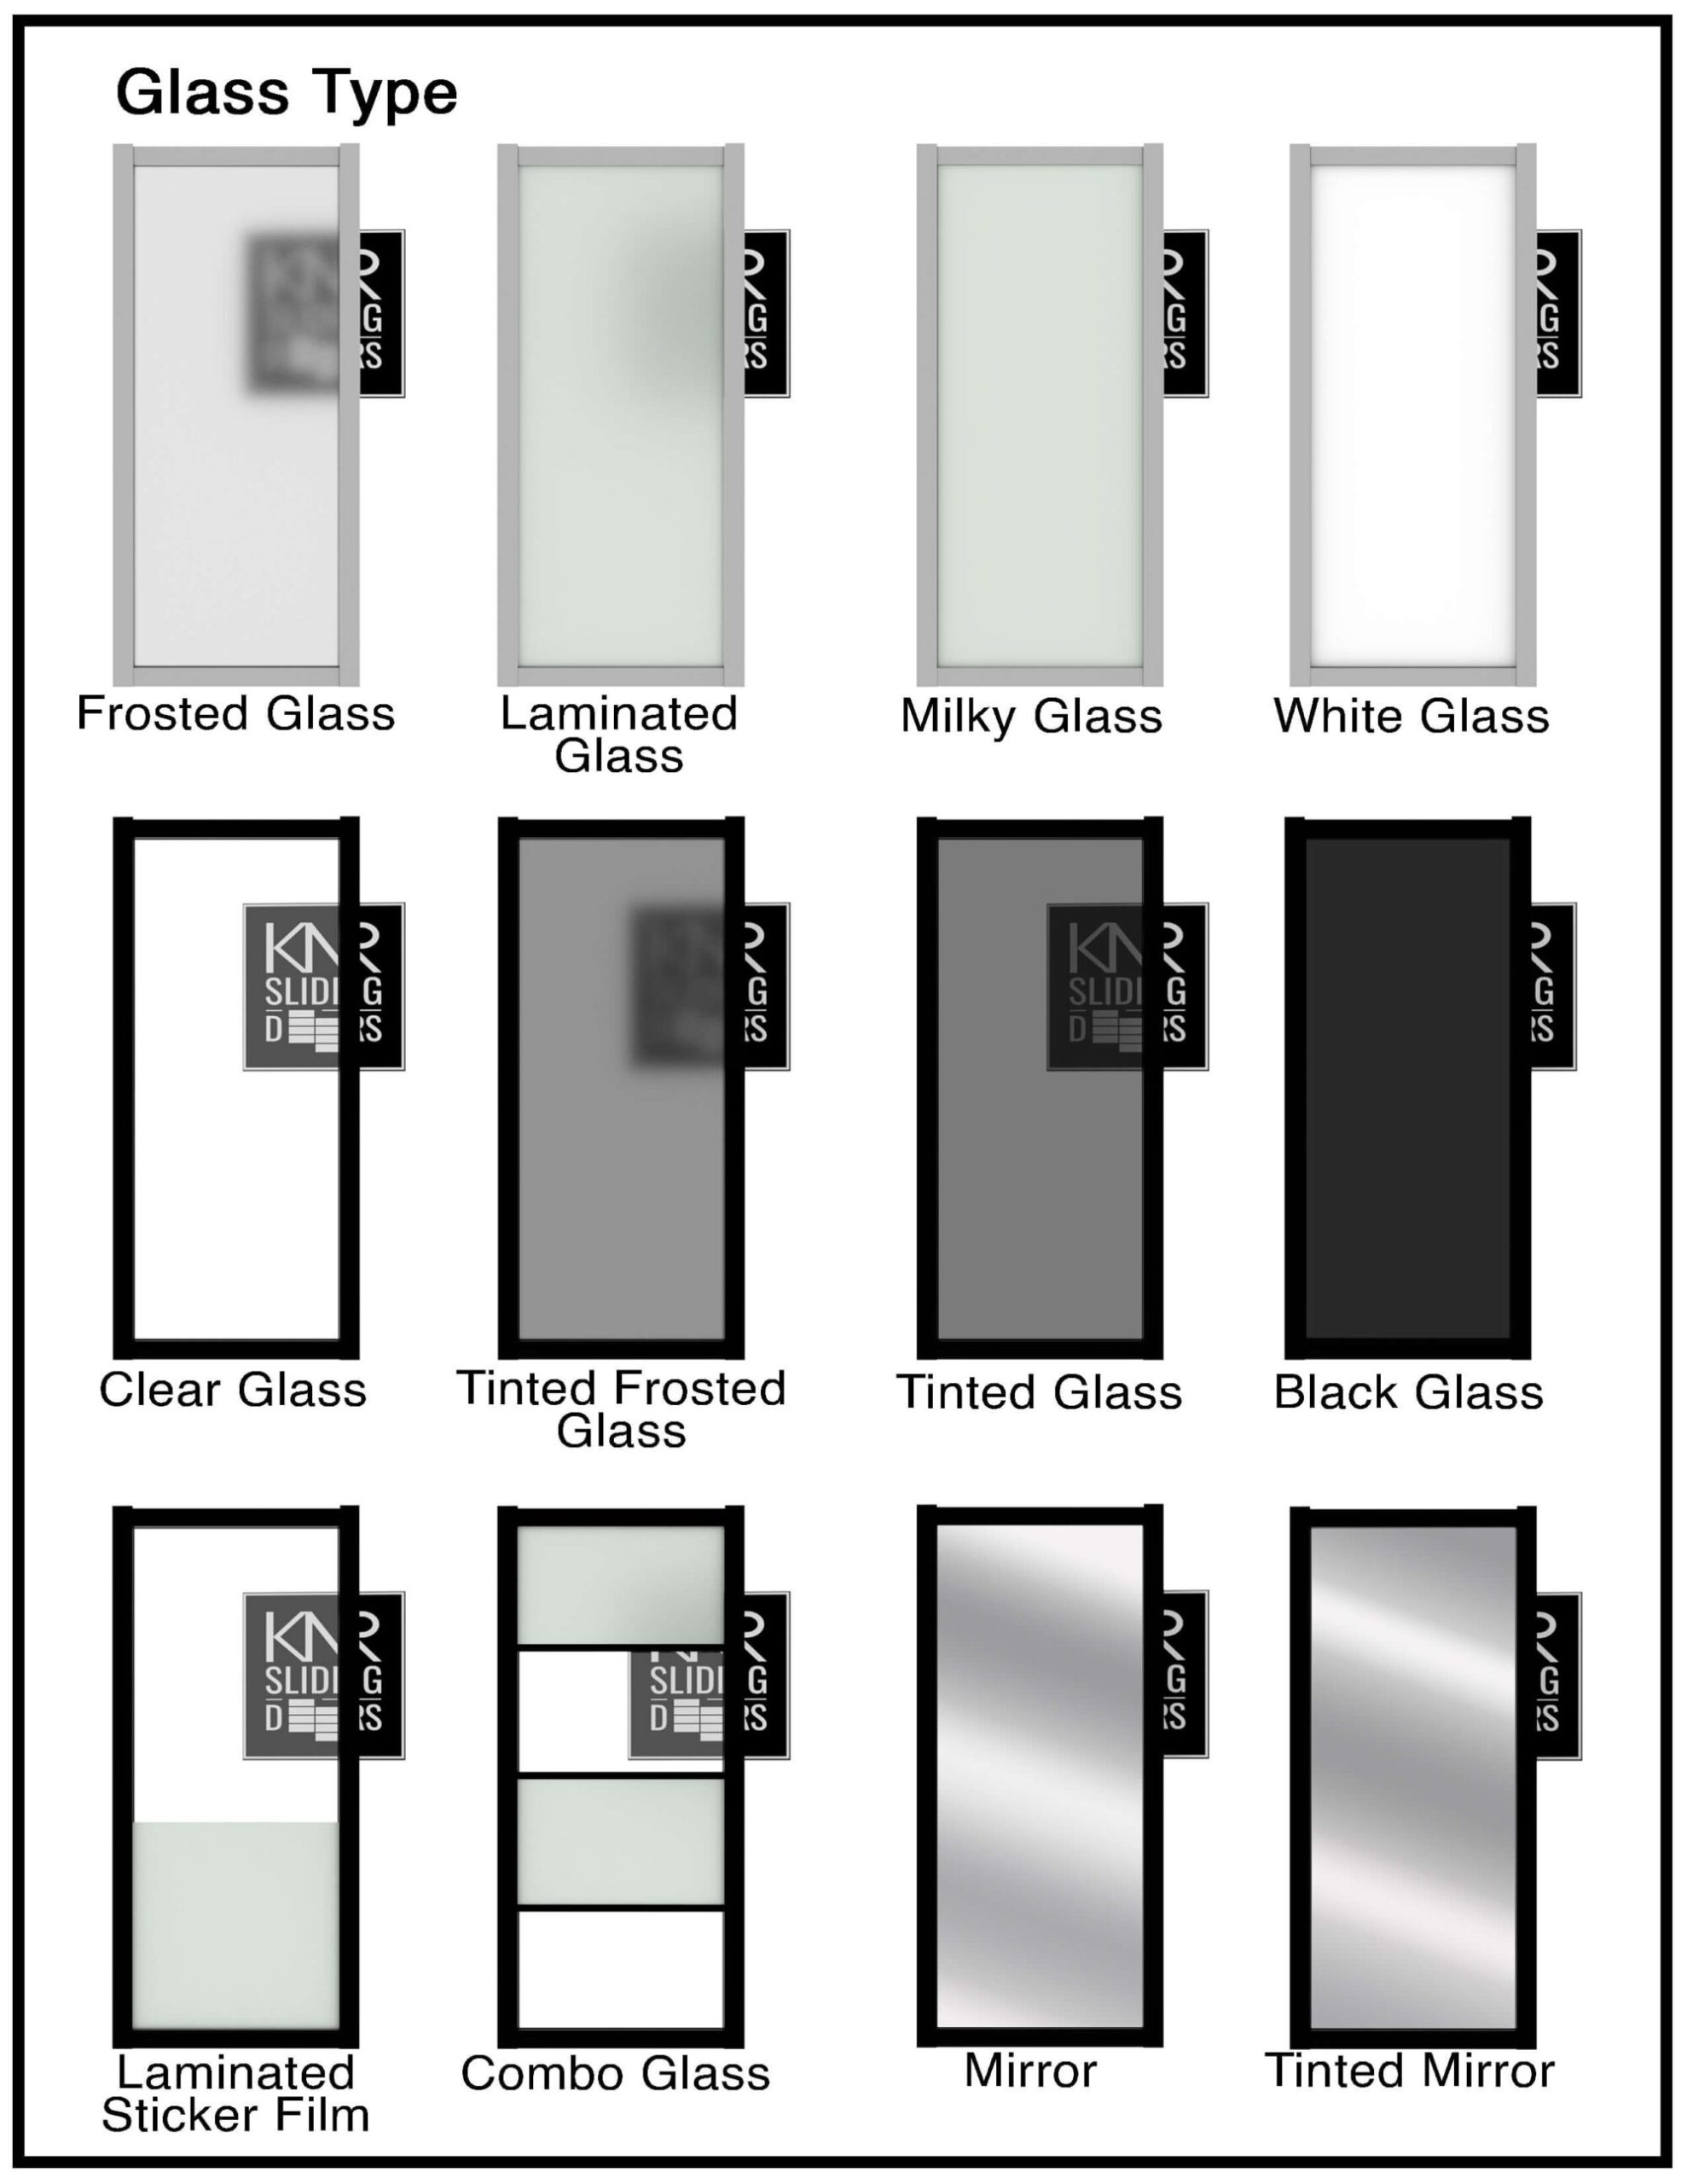 Different types of glass doors and glass finishes with labels for interior doors.